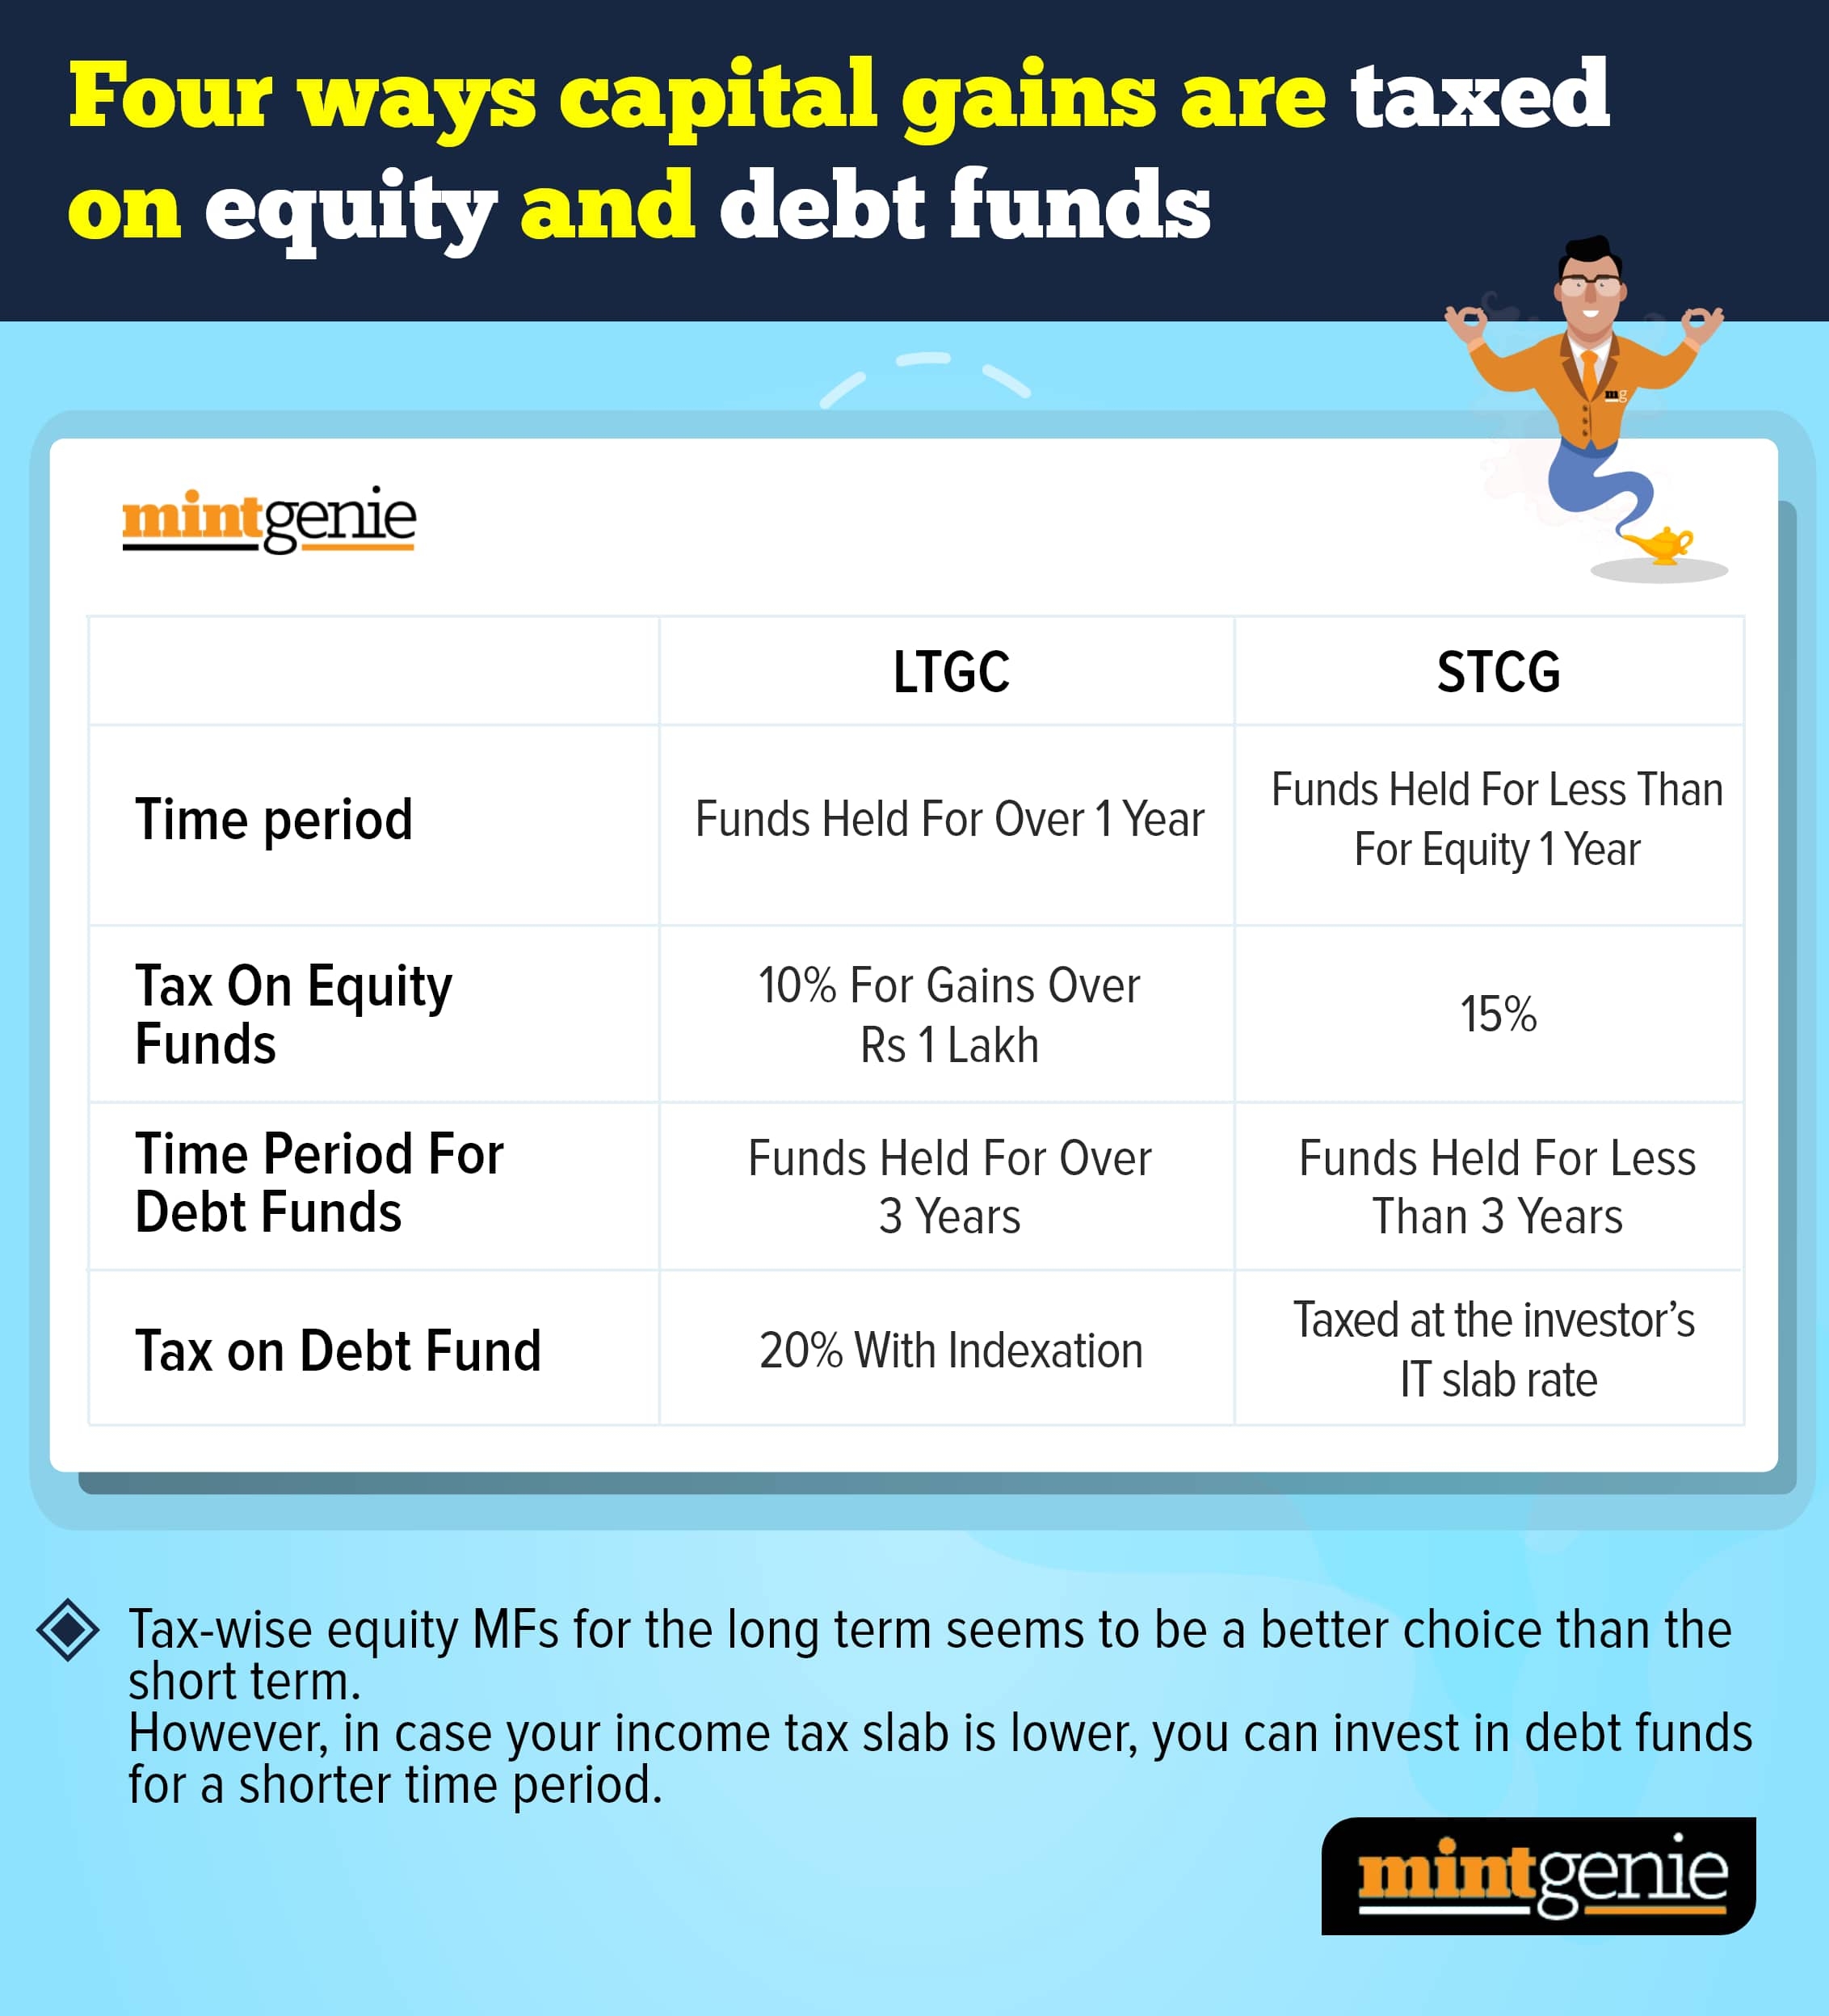 Taxation on equity and debt funds